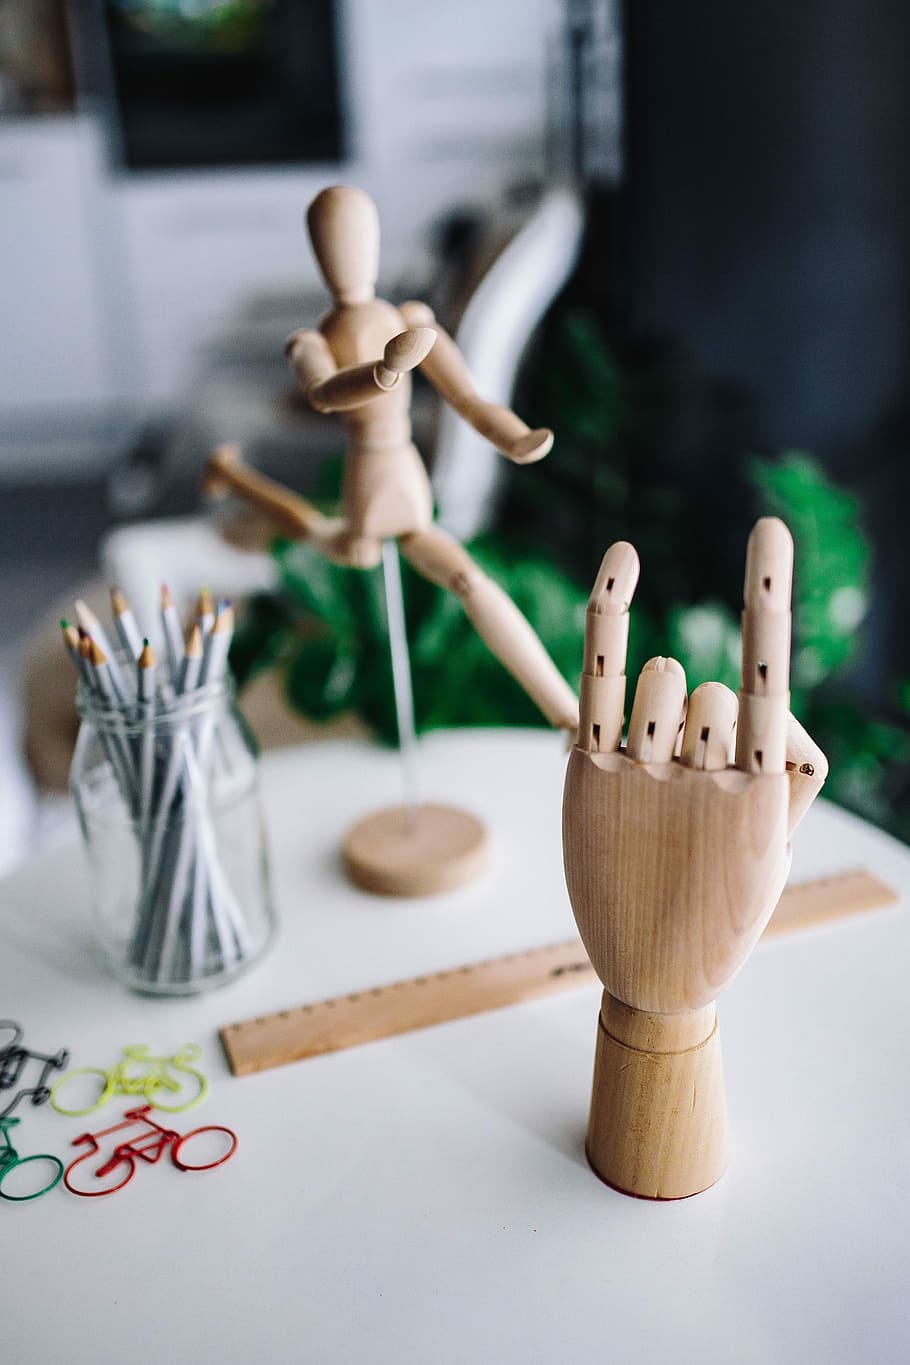 Premium Photo | Art concept, wooden figure for modeling poses of human and  paintbrush